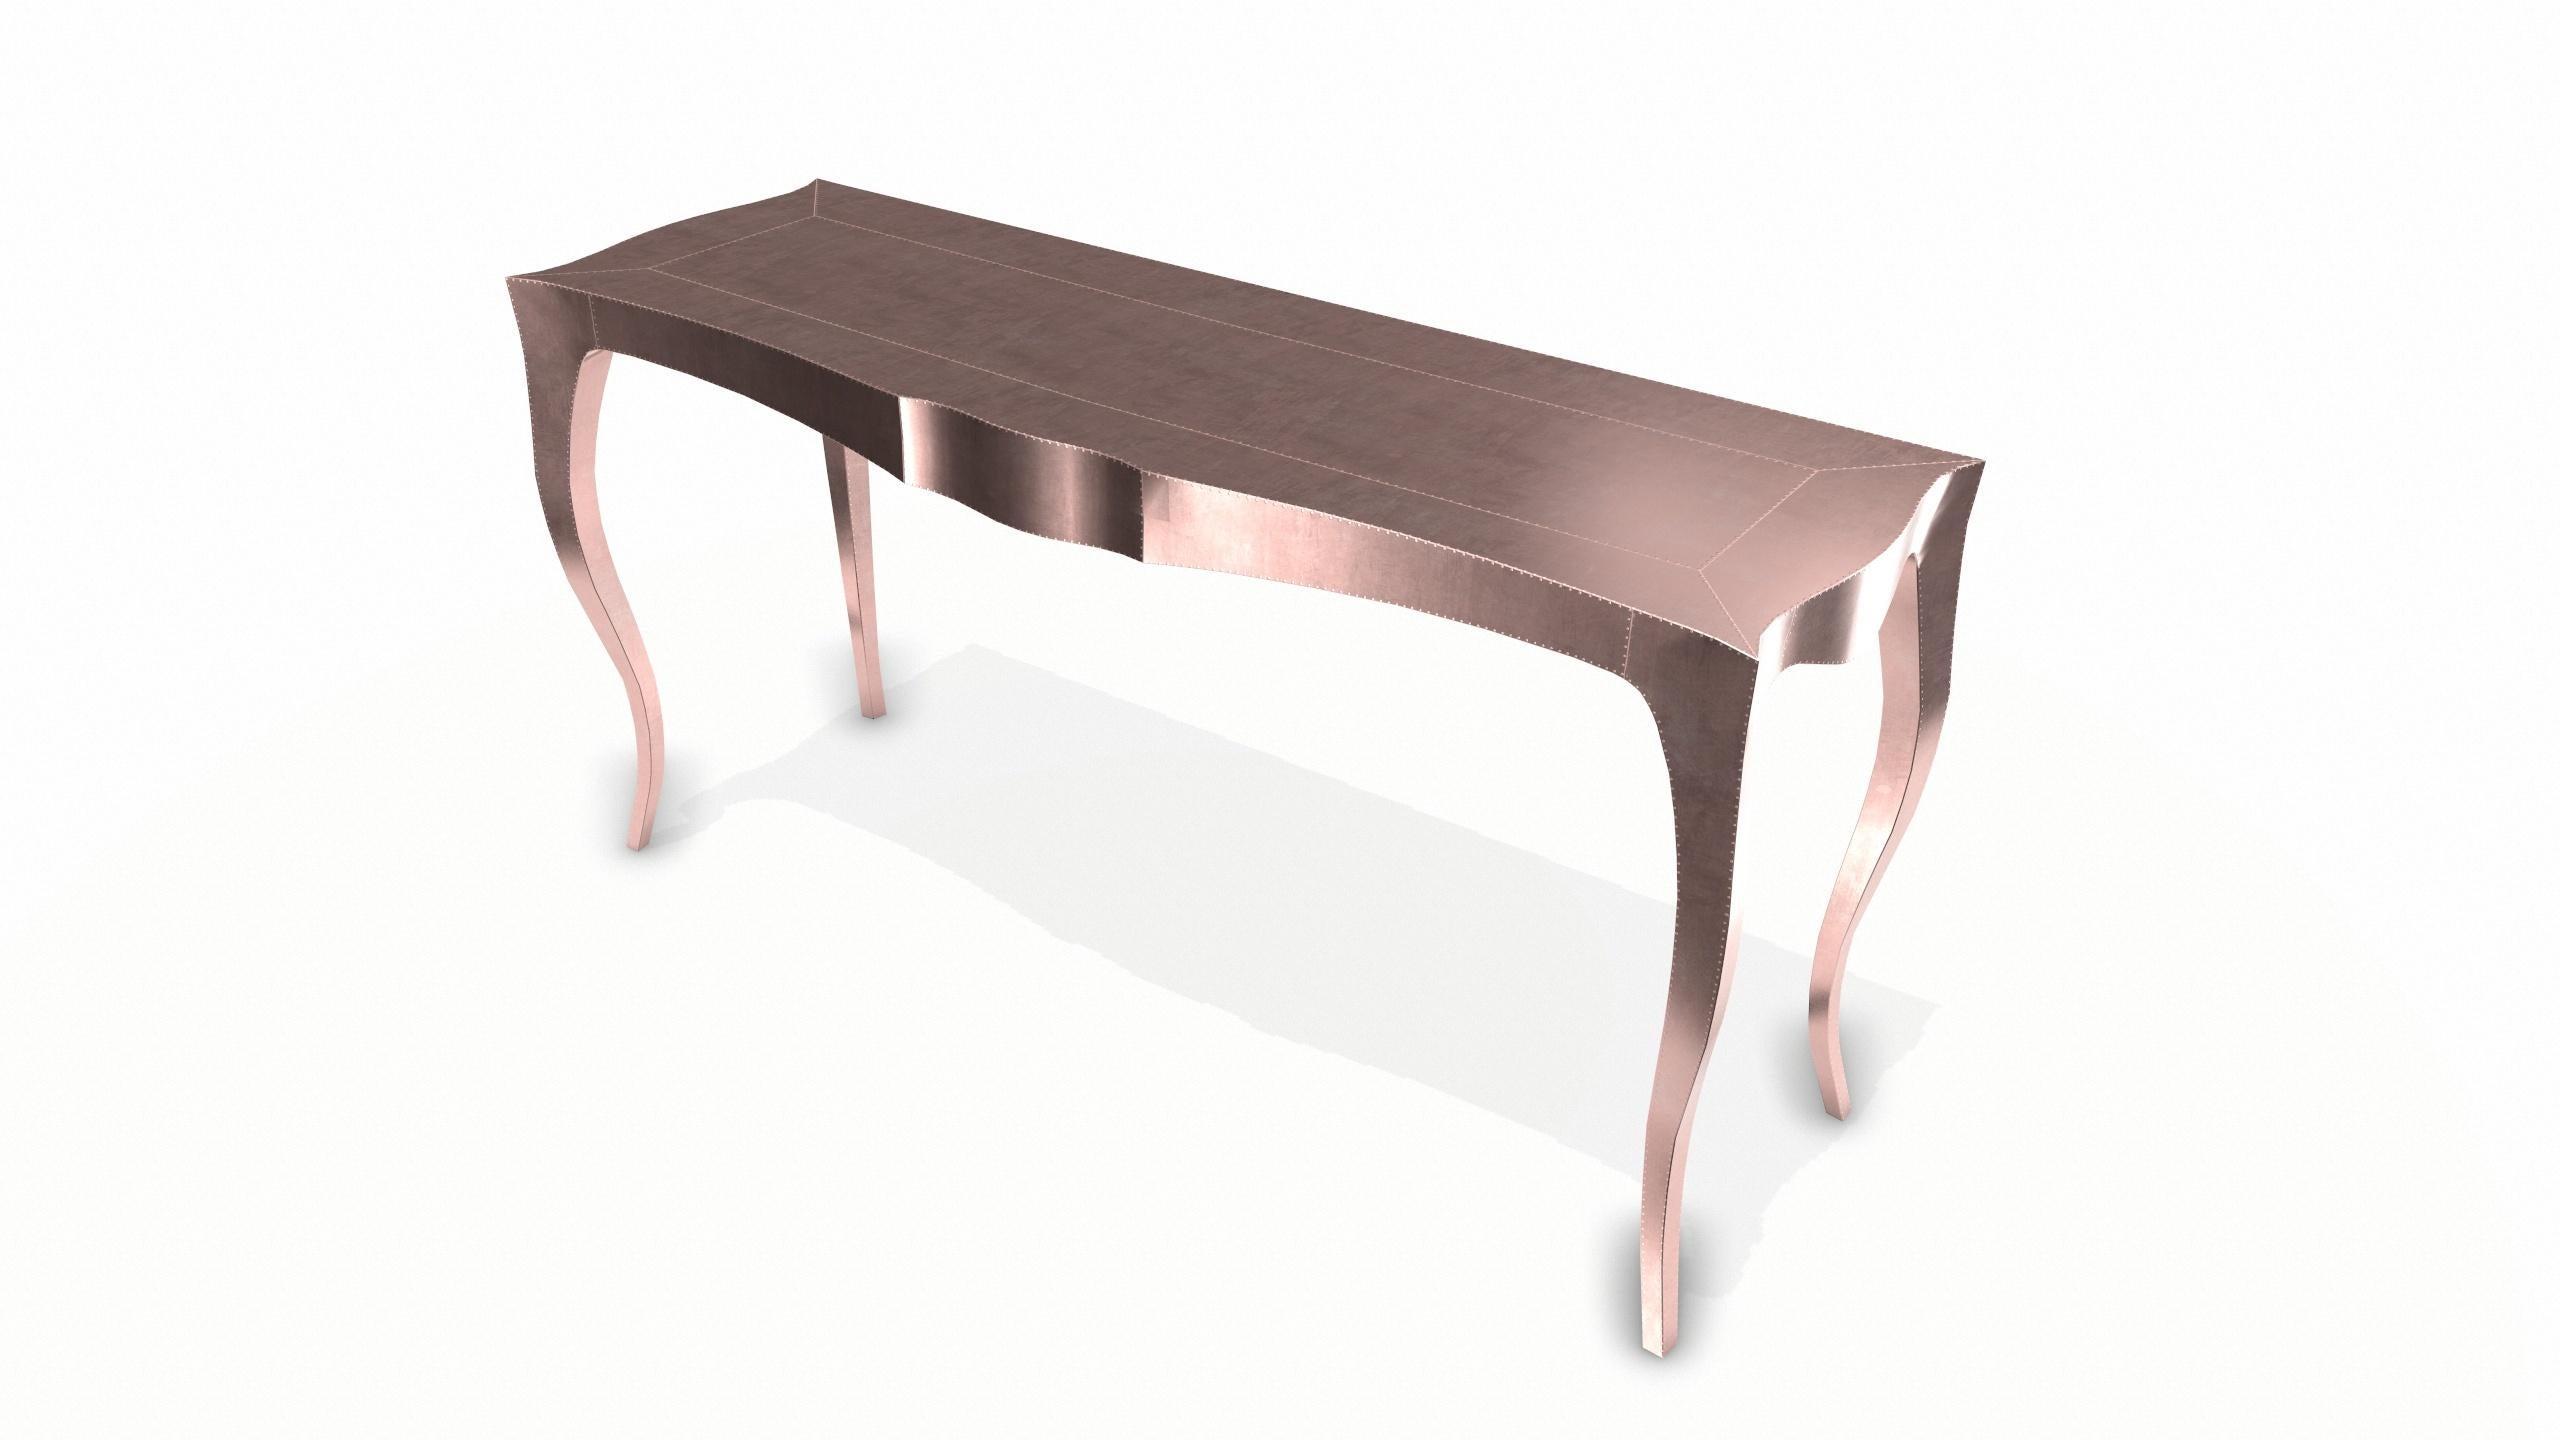 Other Louise Console Art Deco Side Tables Smooth Copper by Paul Mathieu For Sale